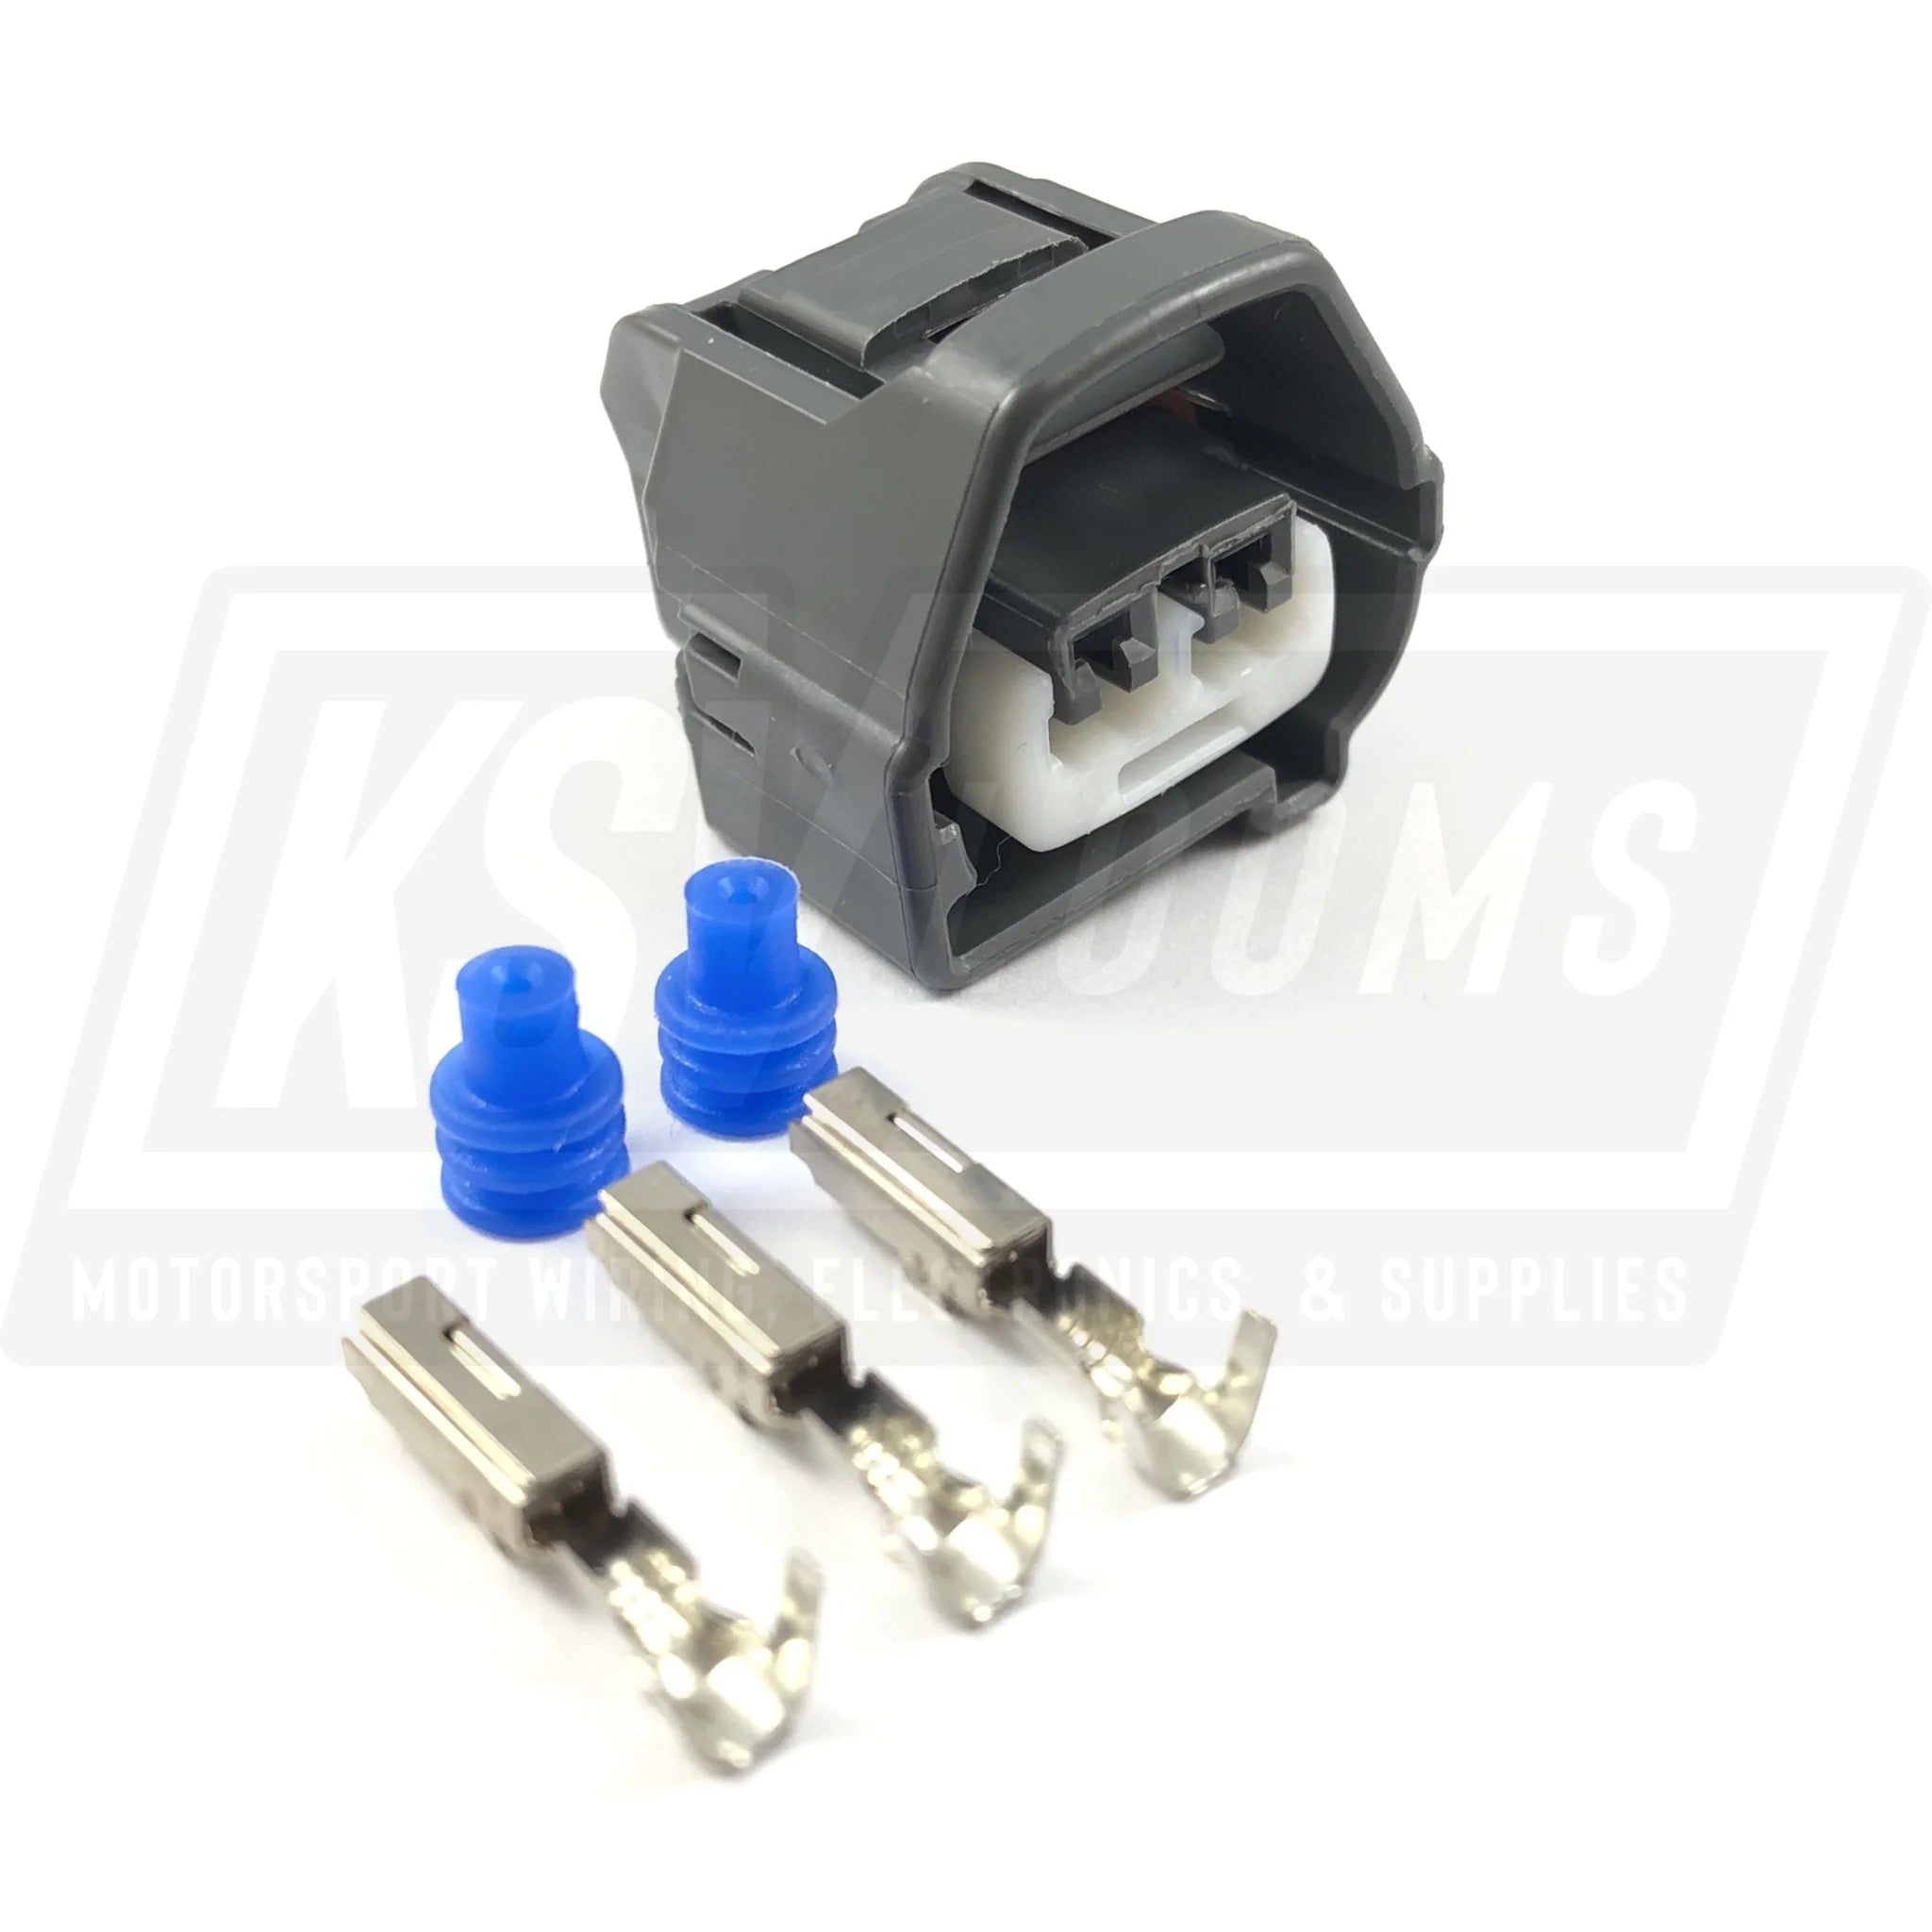 2-Way Connector Kit For Lexus Is300 2Jz-Ge Cam Angle Position Sensor (22-20 Awg)